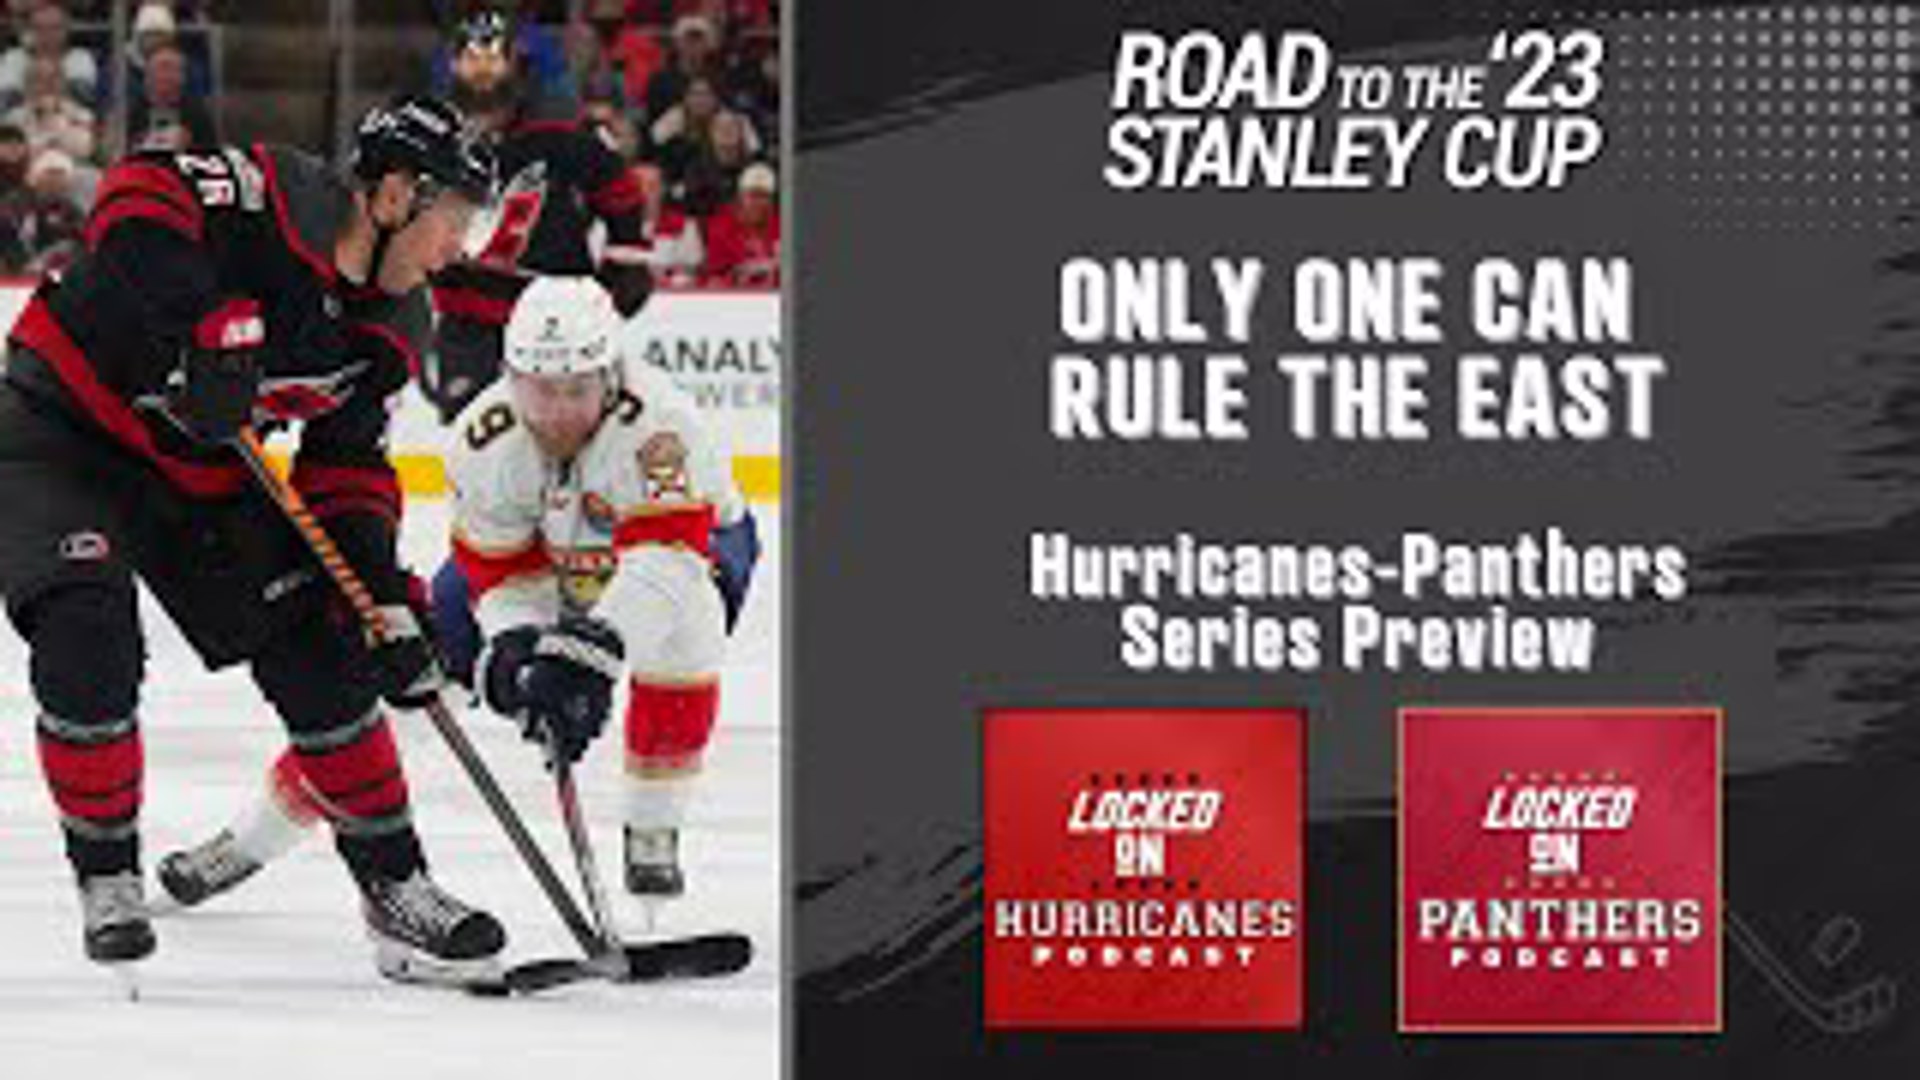 Jared Ellis sits down with Locked On Florida Panthers host Armando Velez to preview the matchup against the Canes' old Southeast Division rival.